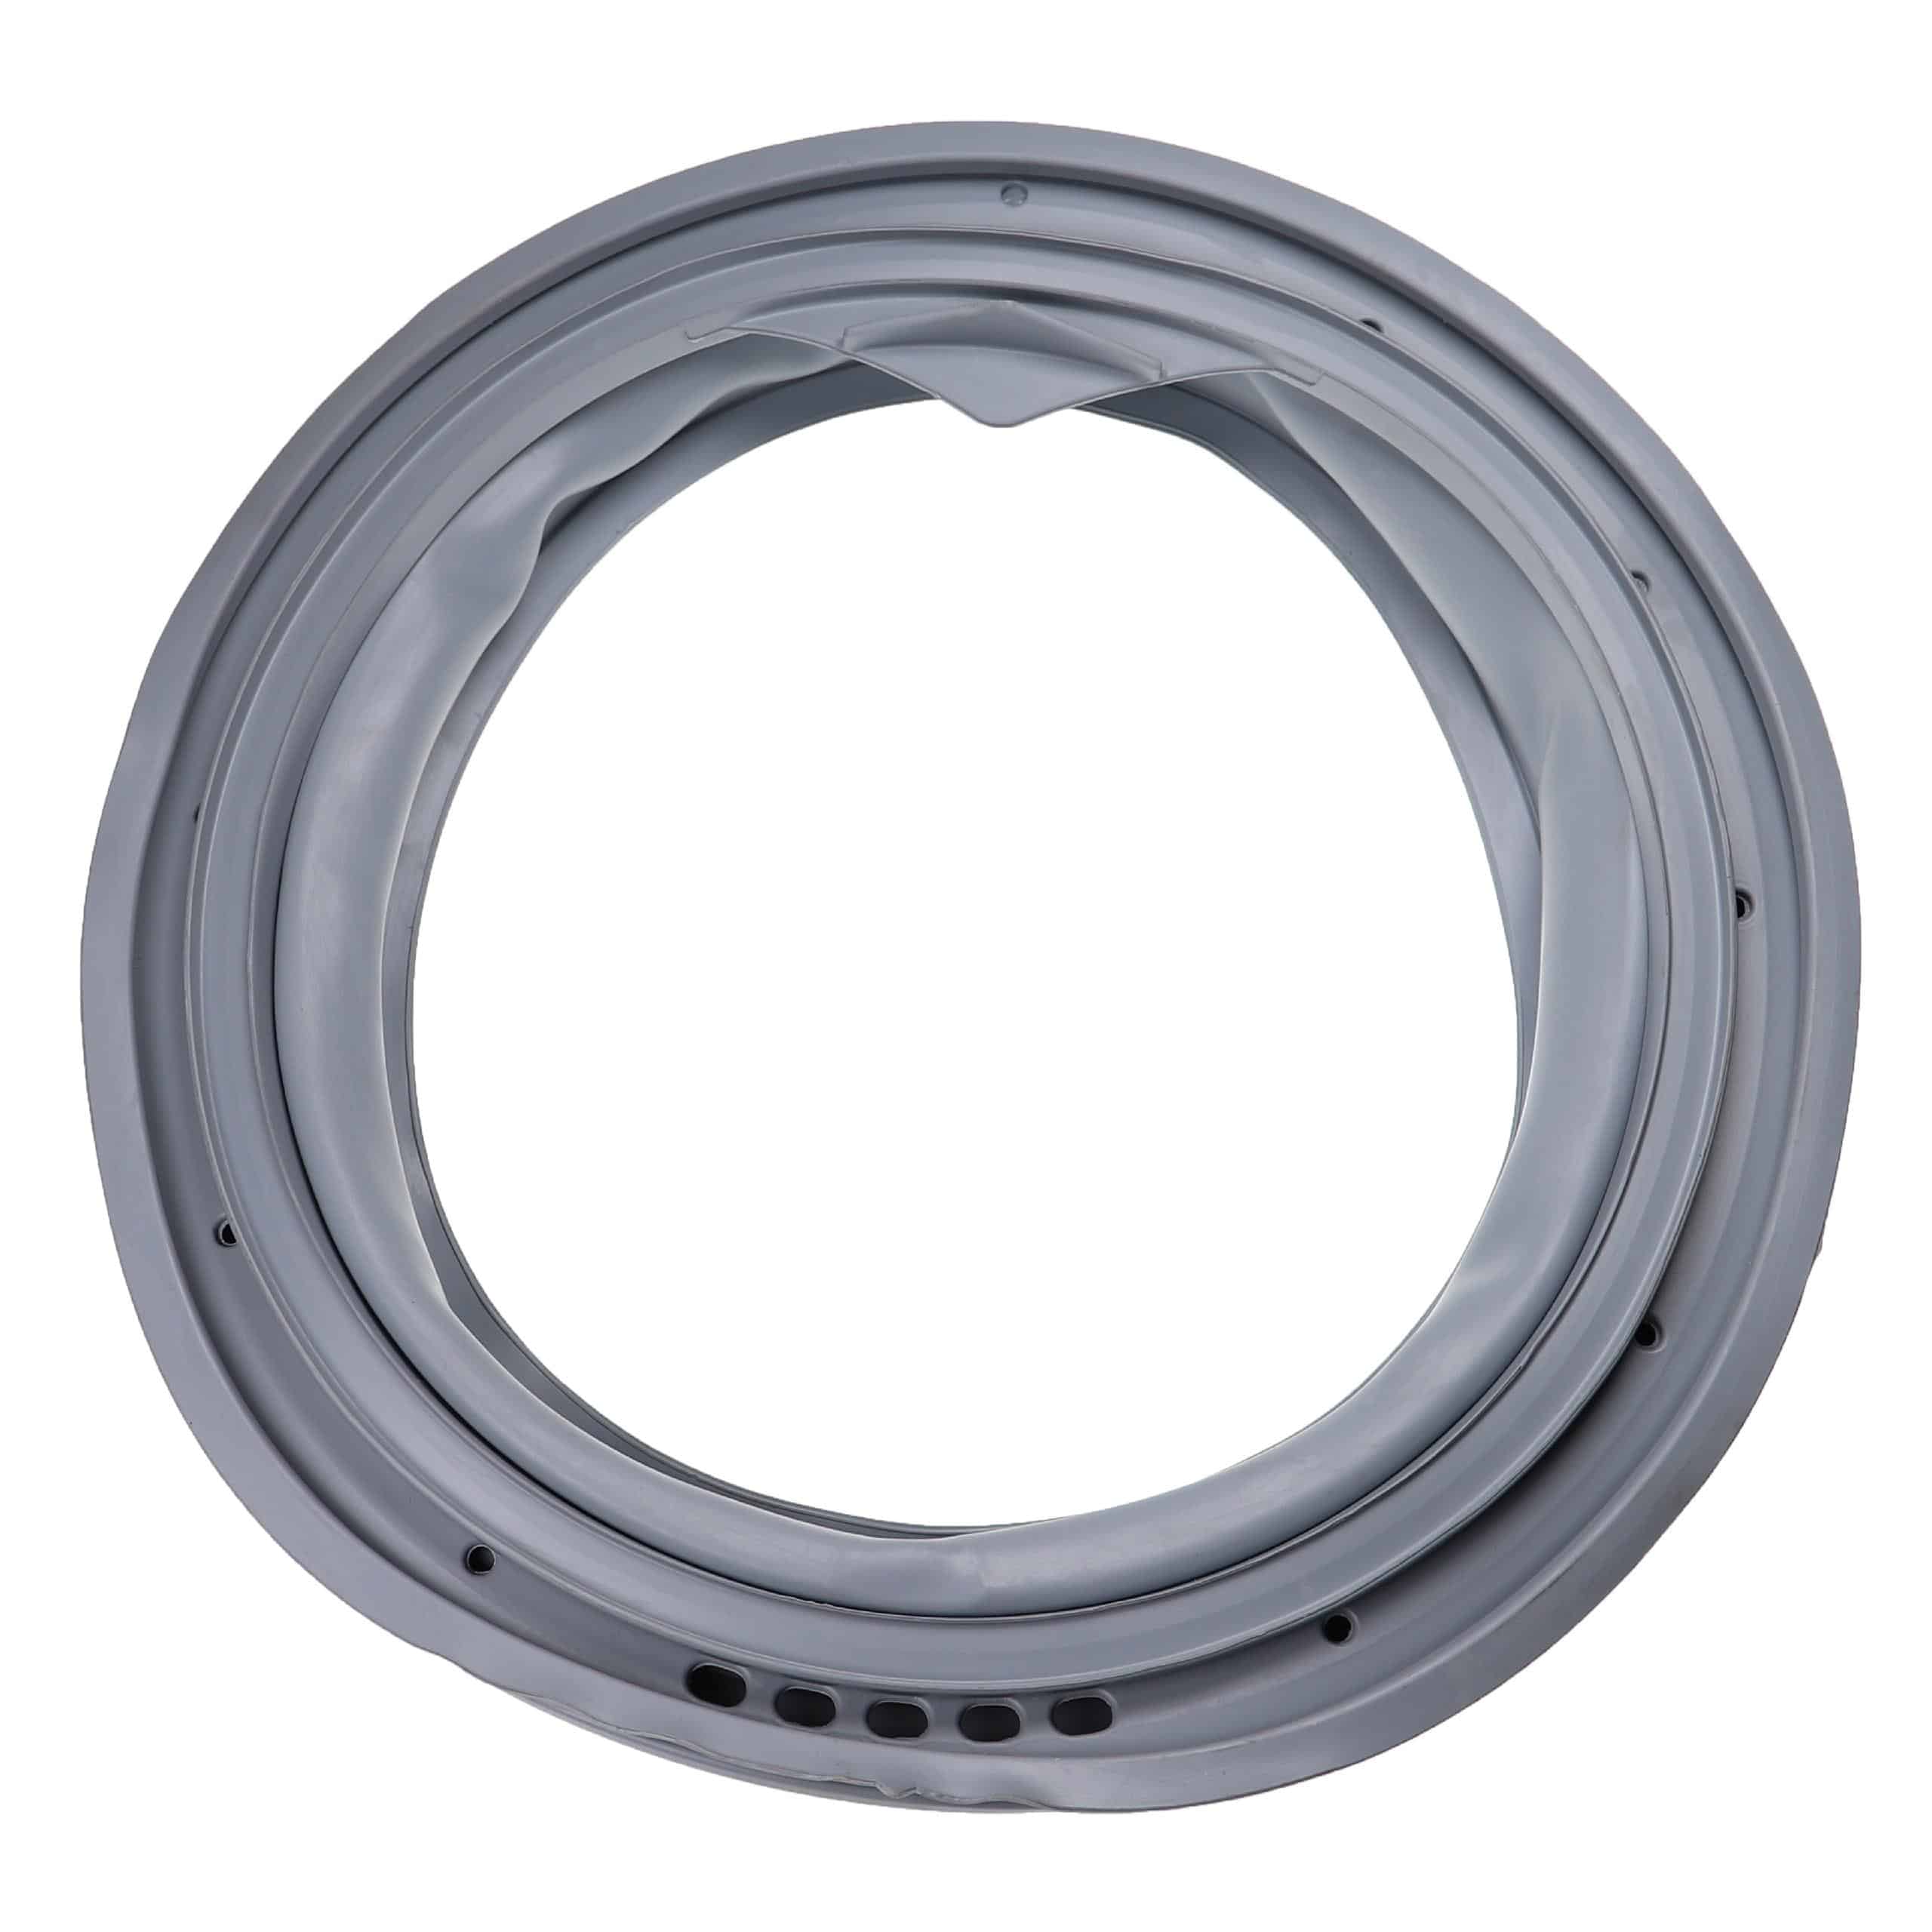 Door Seal replaces 461971408401, 461971408791, 481246068633 for Washing Machine